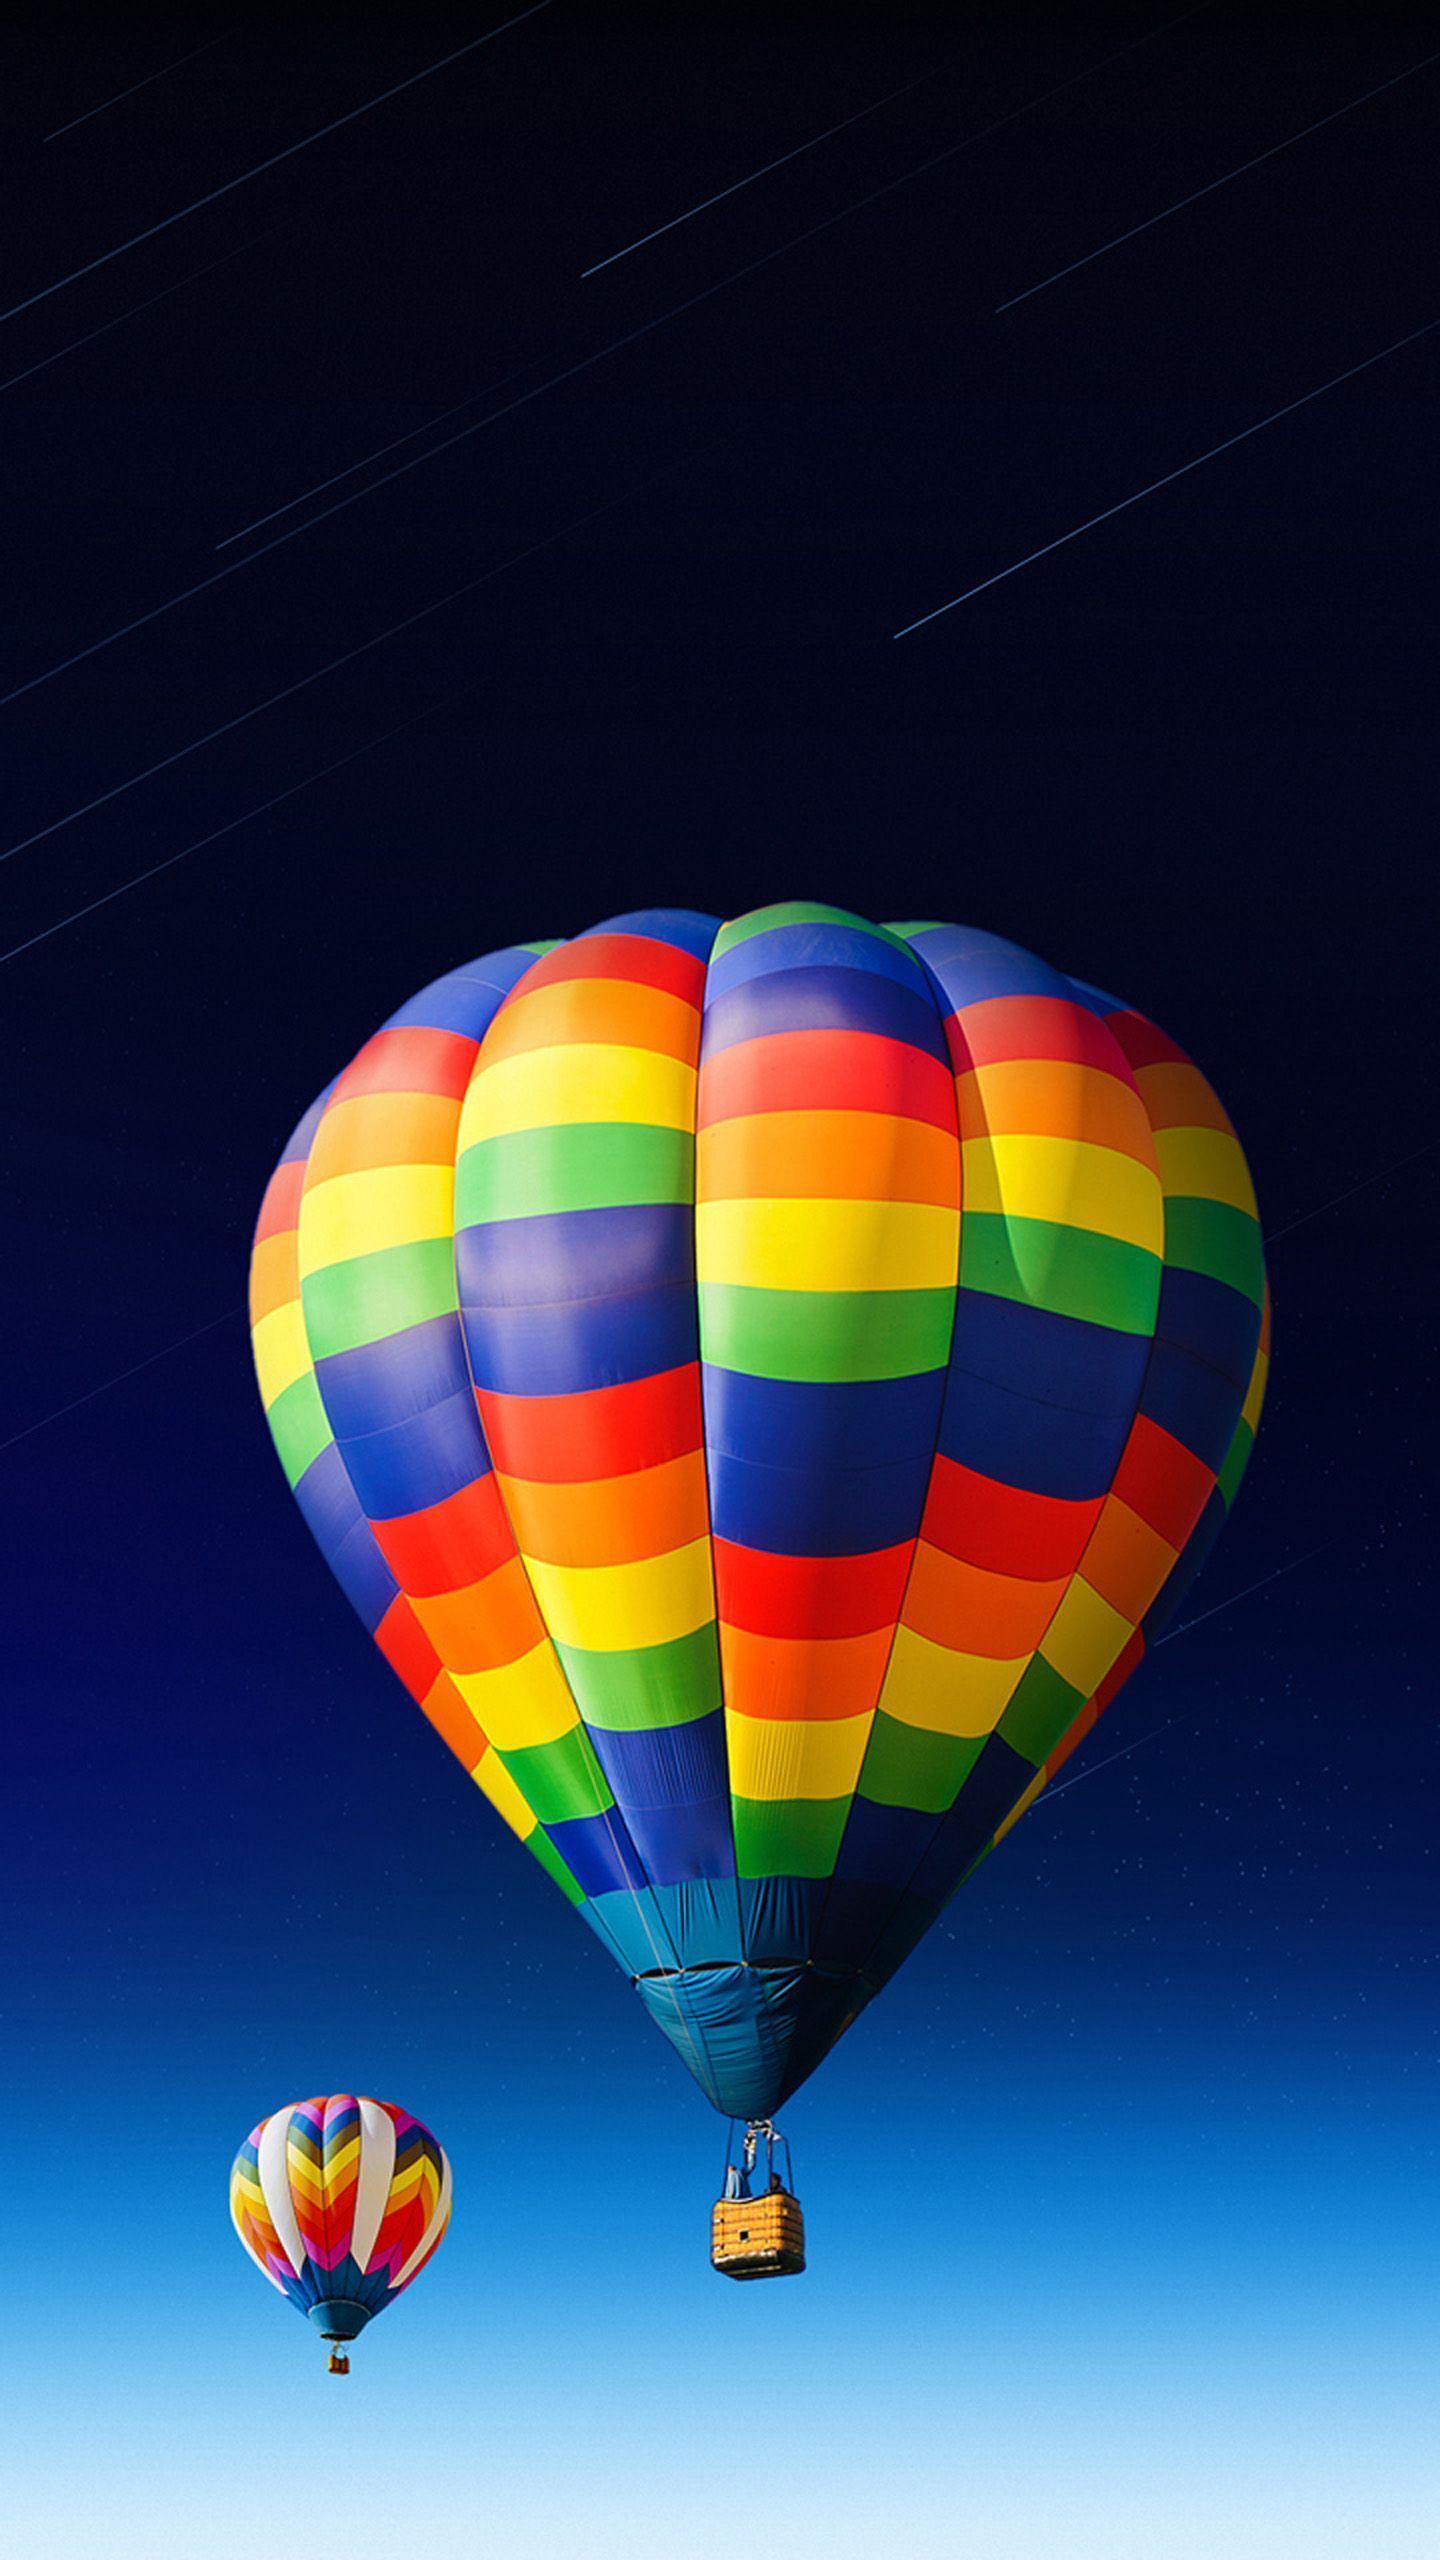 126481 Colorful, Balloons - Rare Gallery HD Wallpapers